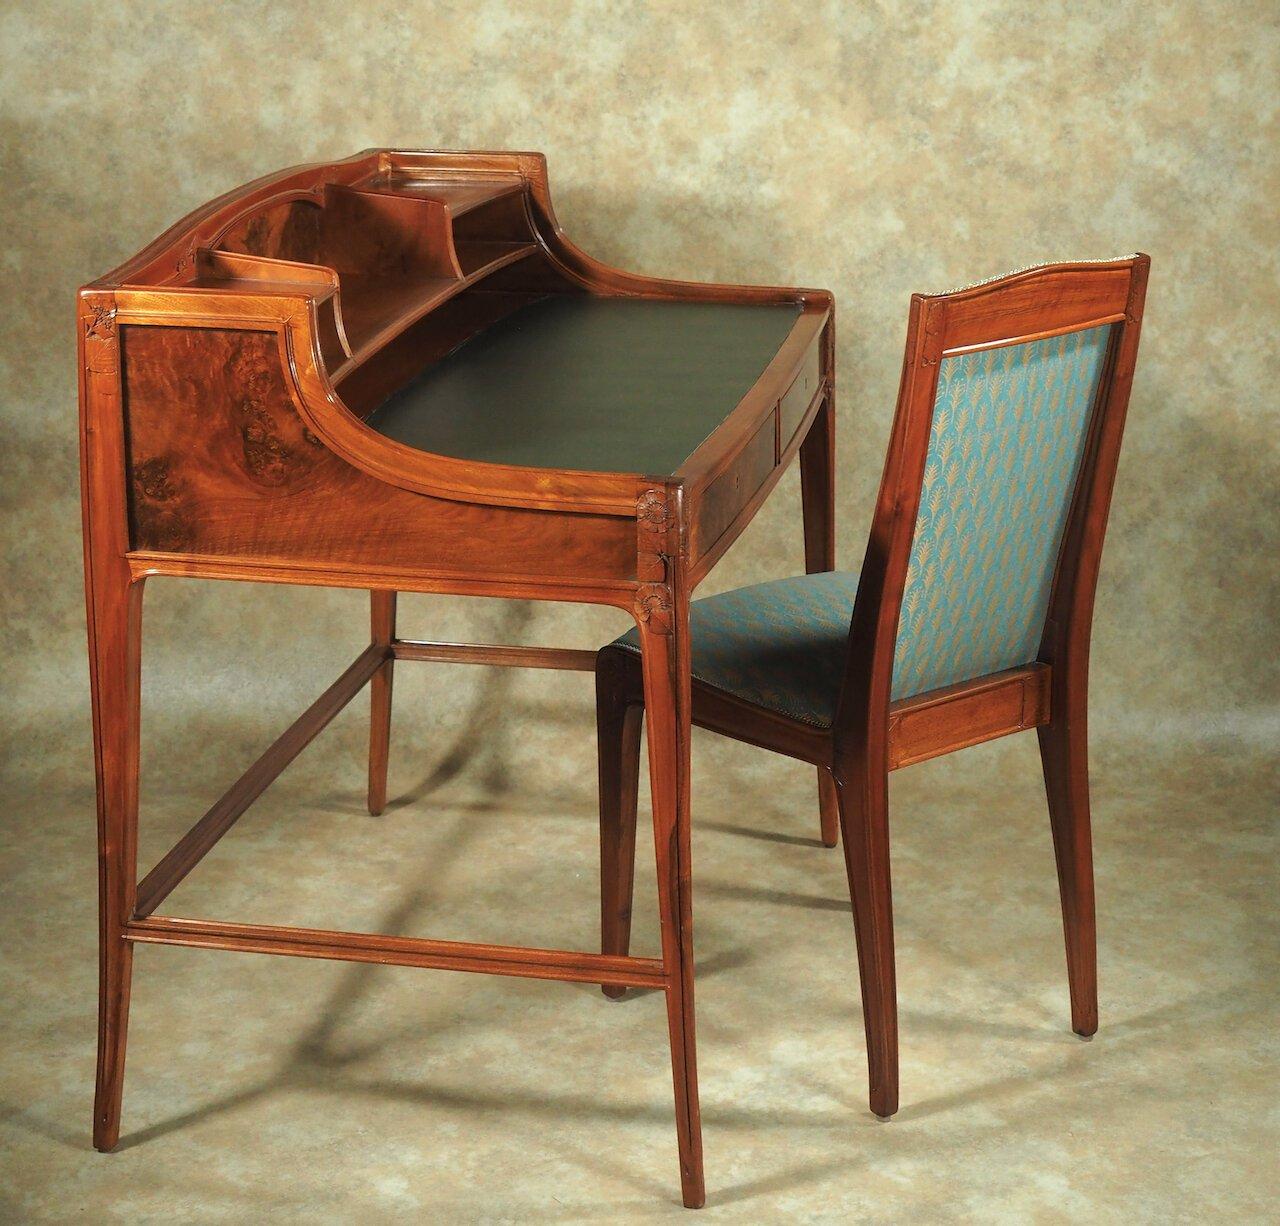 French transitional (from Art Nouveau to early Art Deco) desk and en suite chair by Leon Jallot in sculpted walnut and walnut burl, circa 1910. This desk features Jallot’s beautiful open raspberry blossom and leaves sculpting. The desk is 37.5” wide